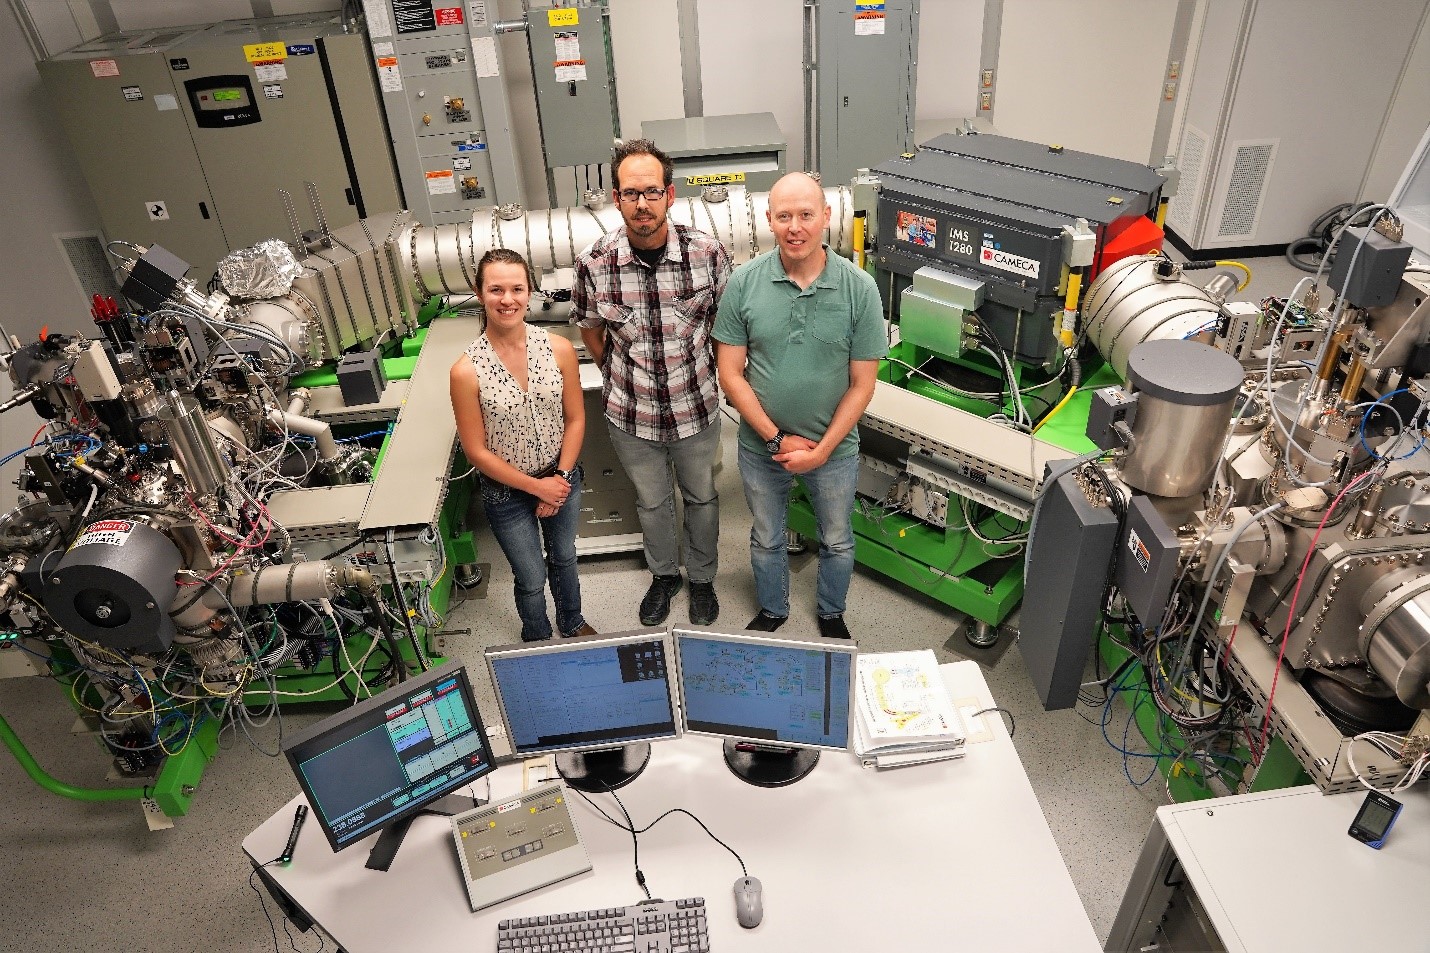 Kim Wurth, Ben Naes, and Travis Tenner with the LG-SIMS instrument